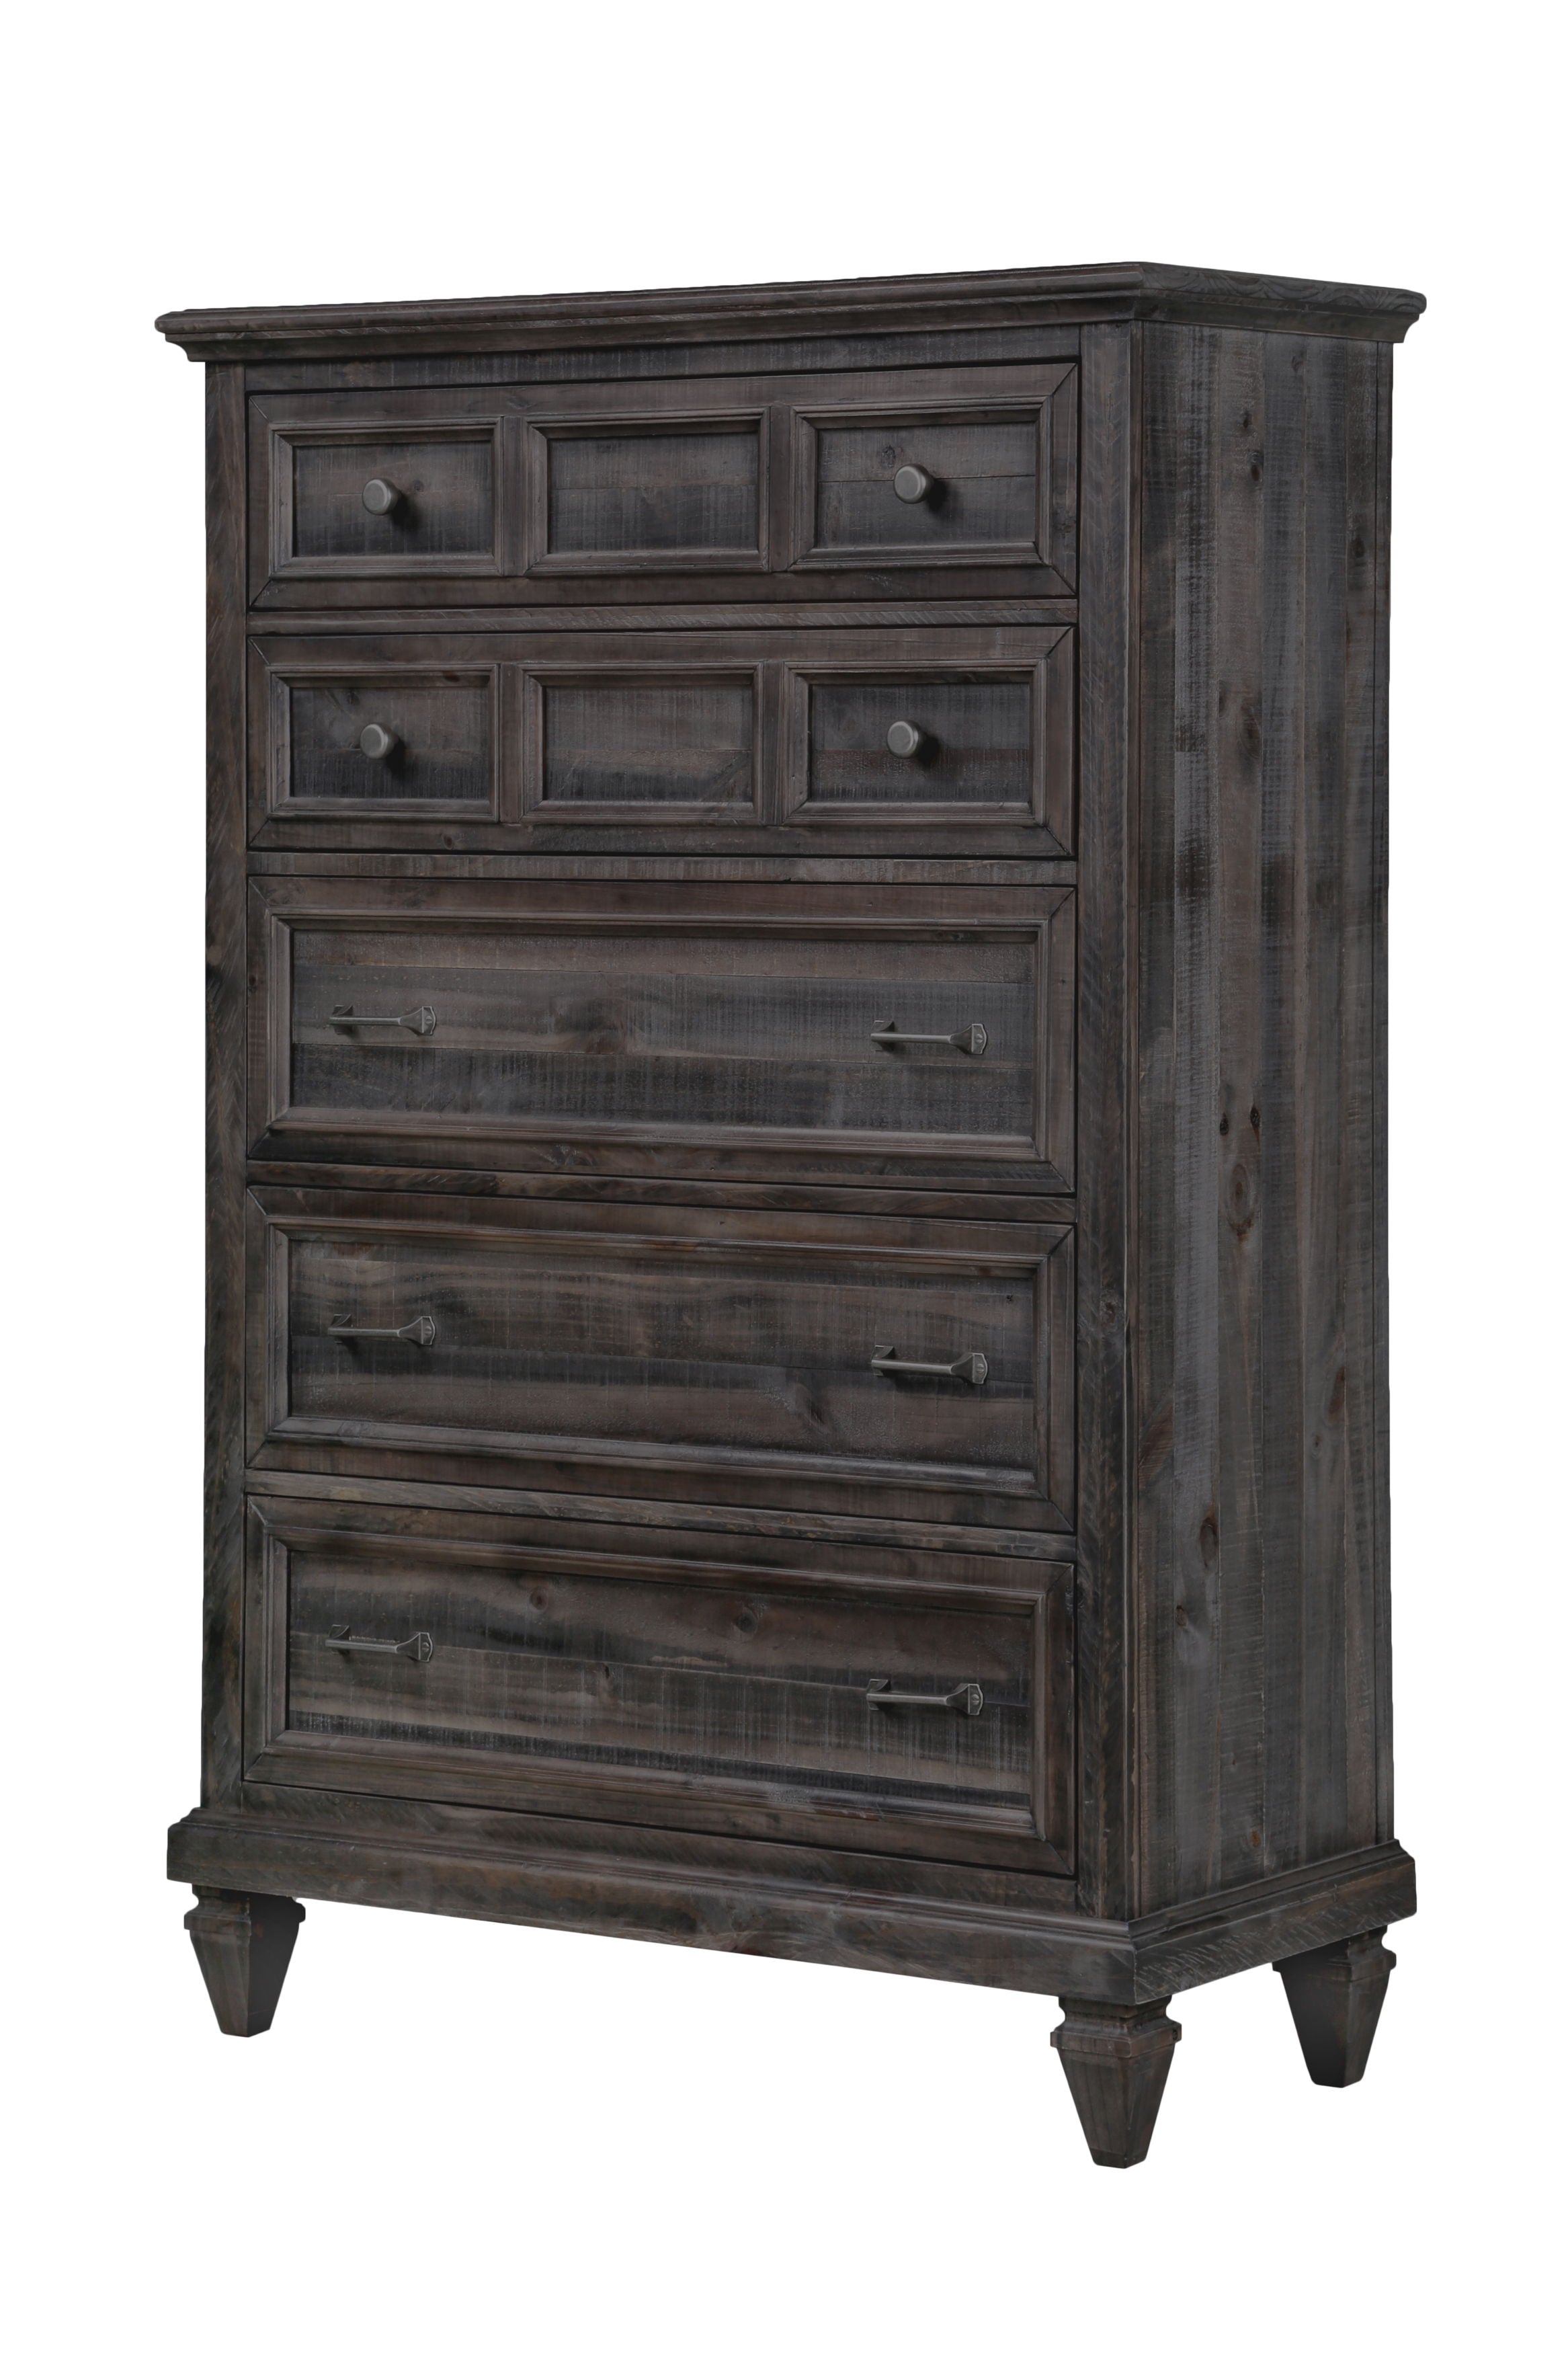 Calistoga - 5 Drawer Chest In Weathered Charcoal - Weathered Charcoal